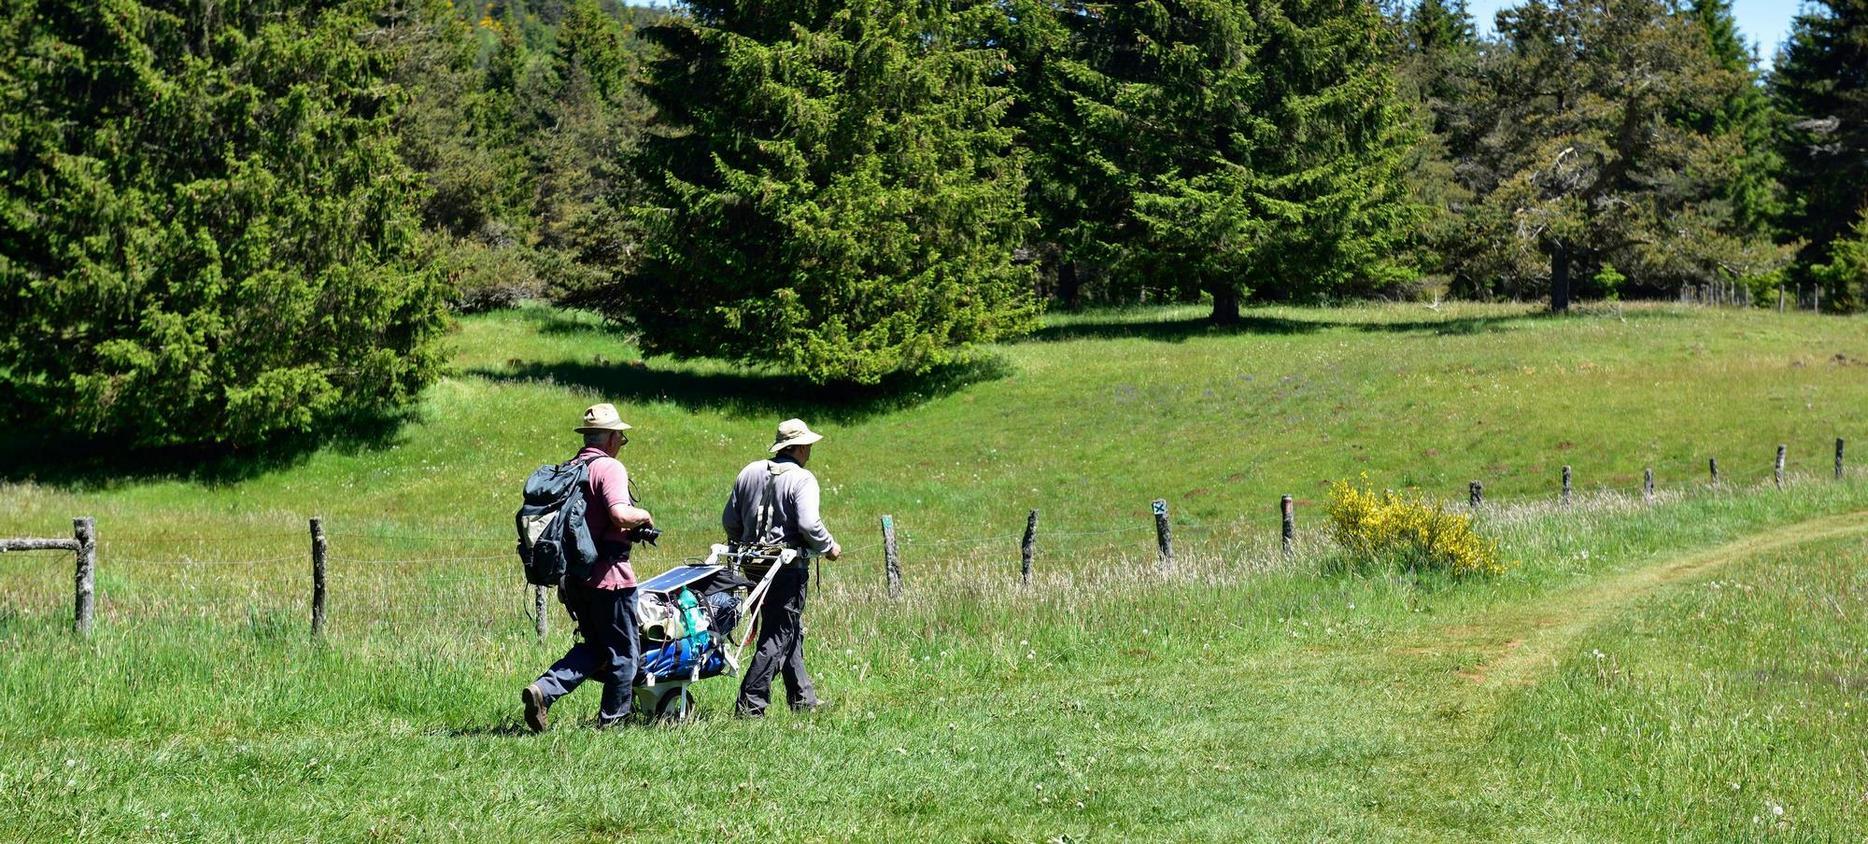 Super besse - Hiking couple in the meadows